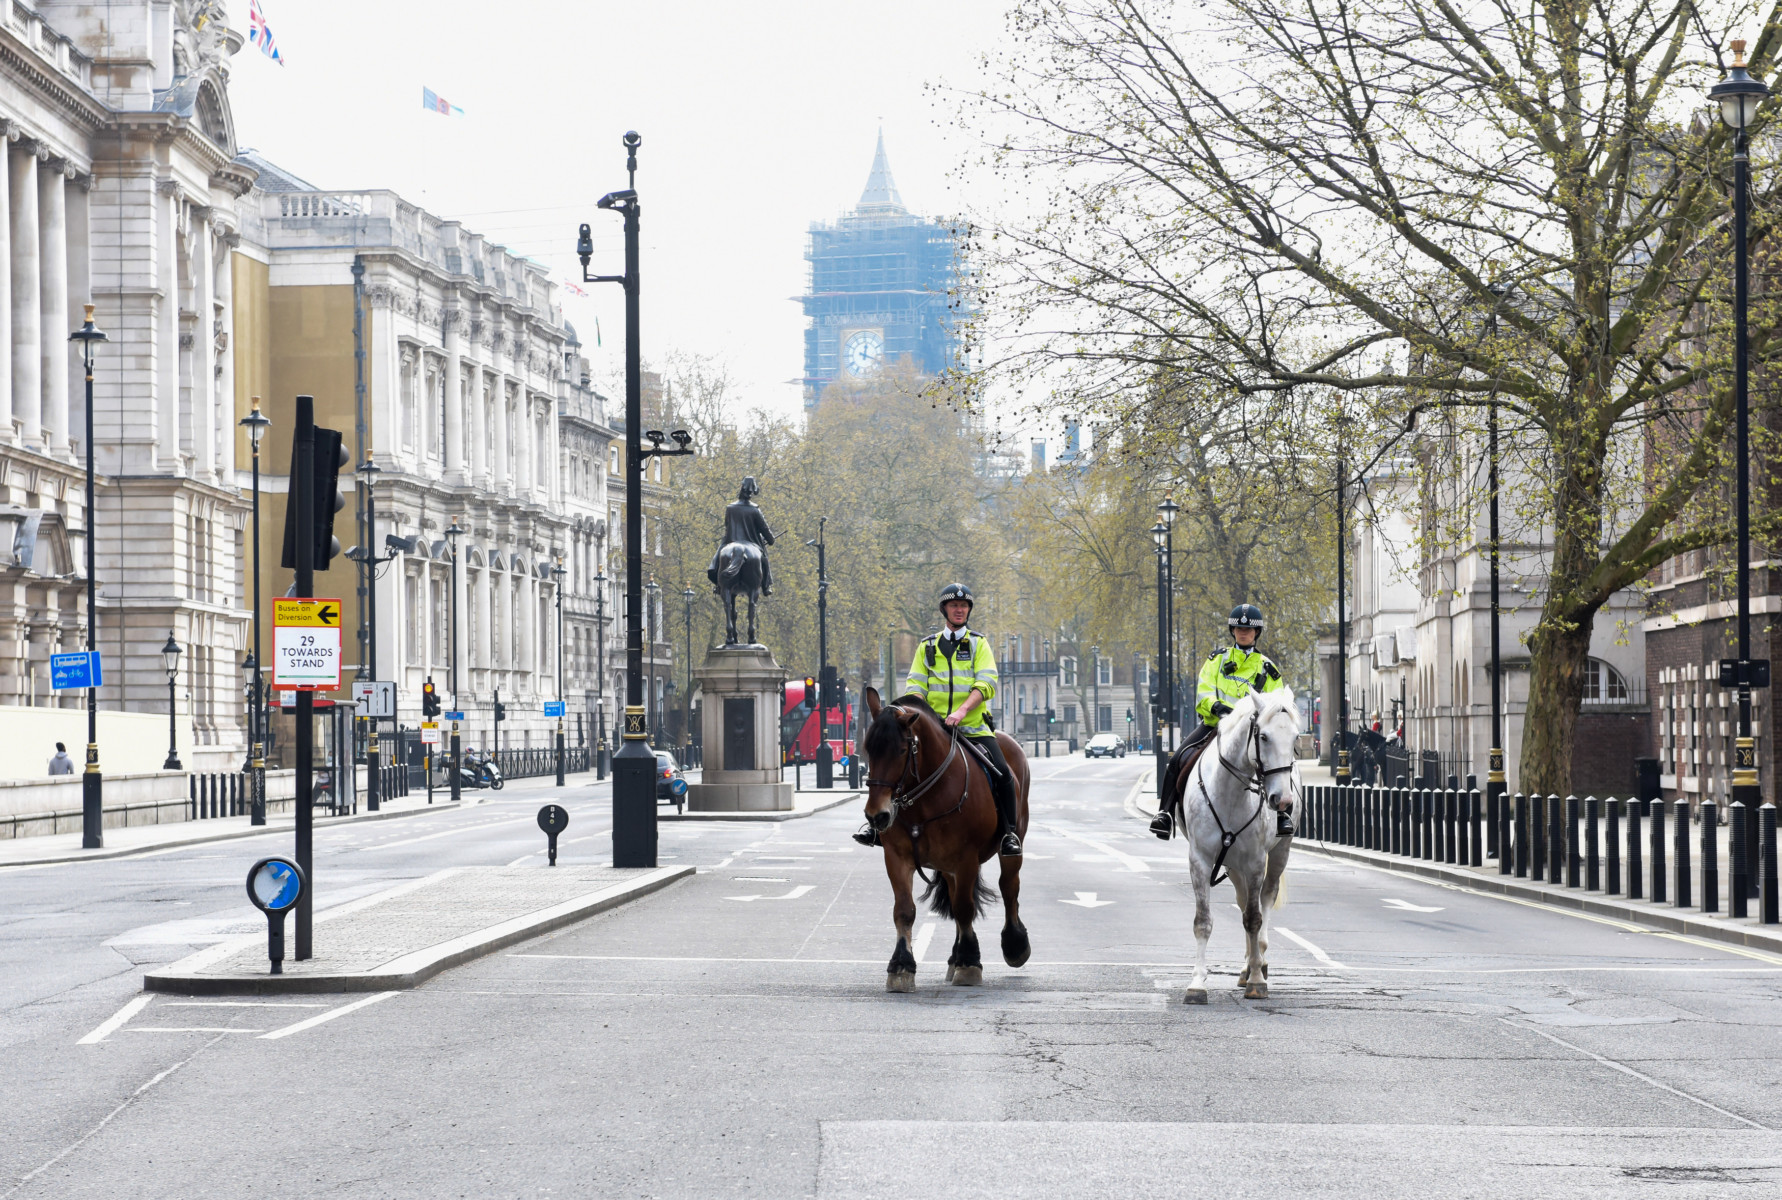 Mounted police patrolled Whitehall as the lockdown continues